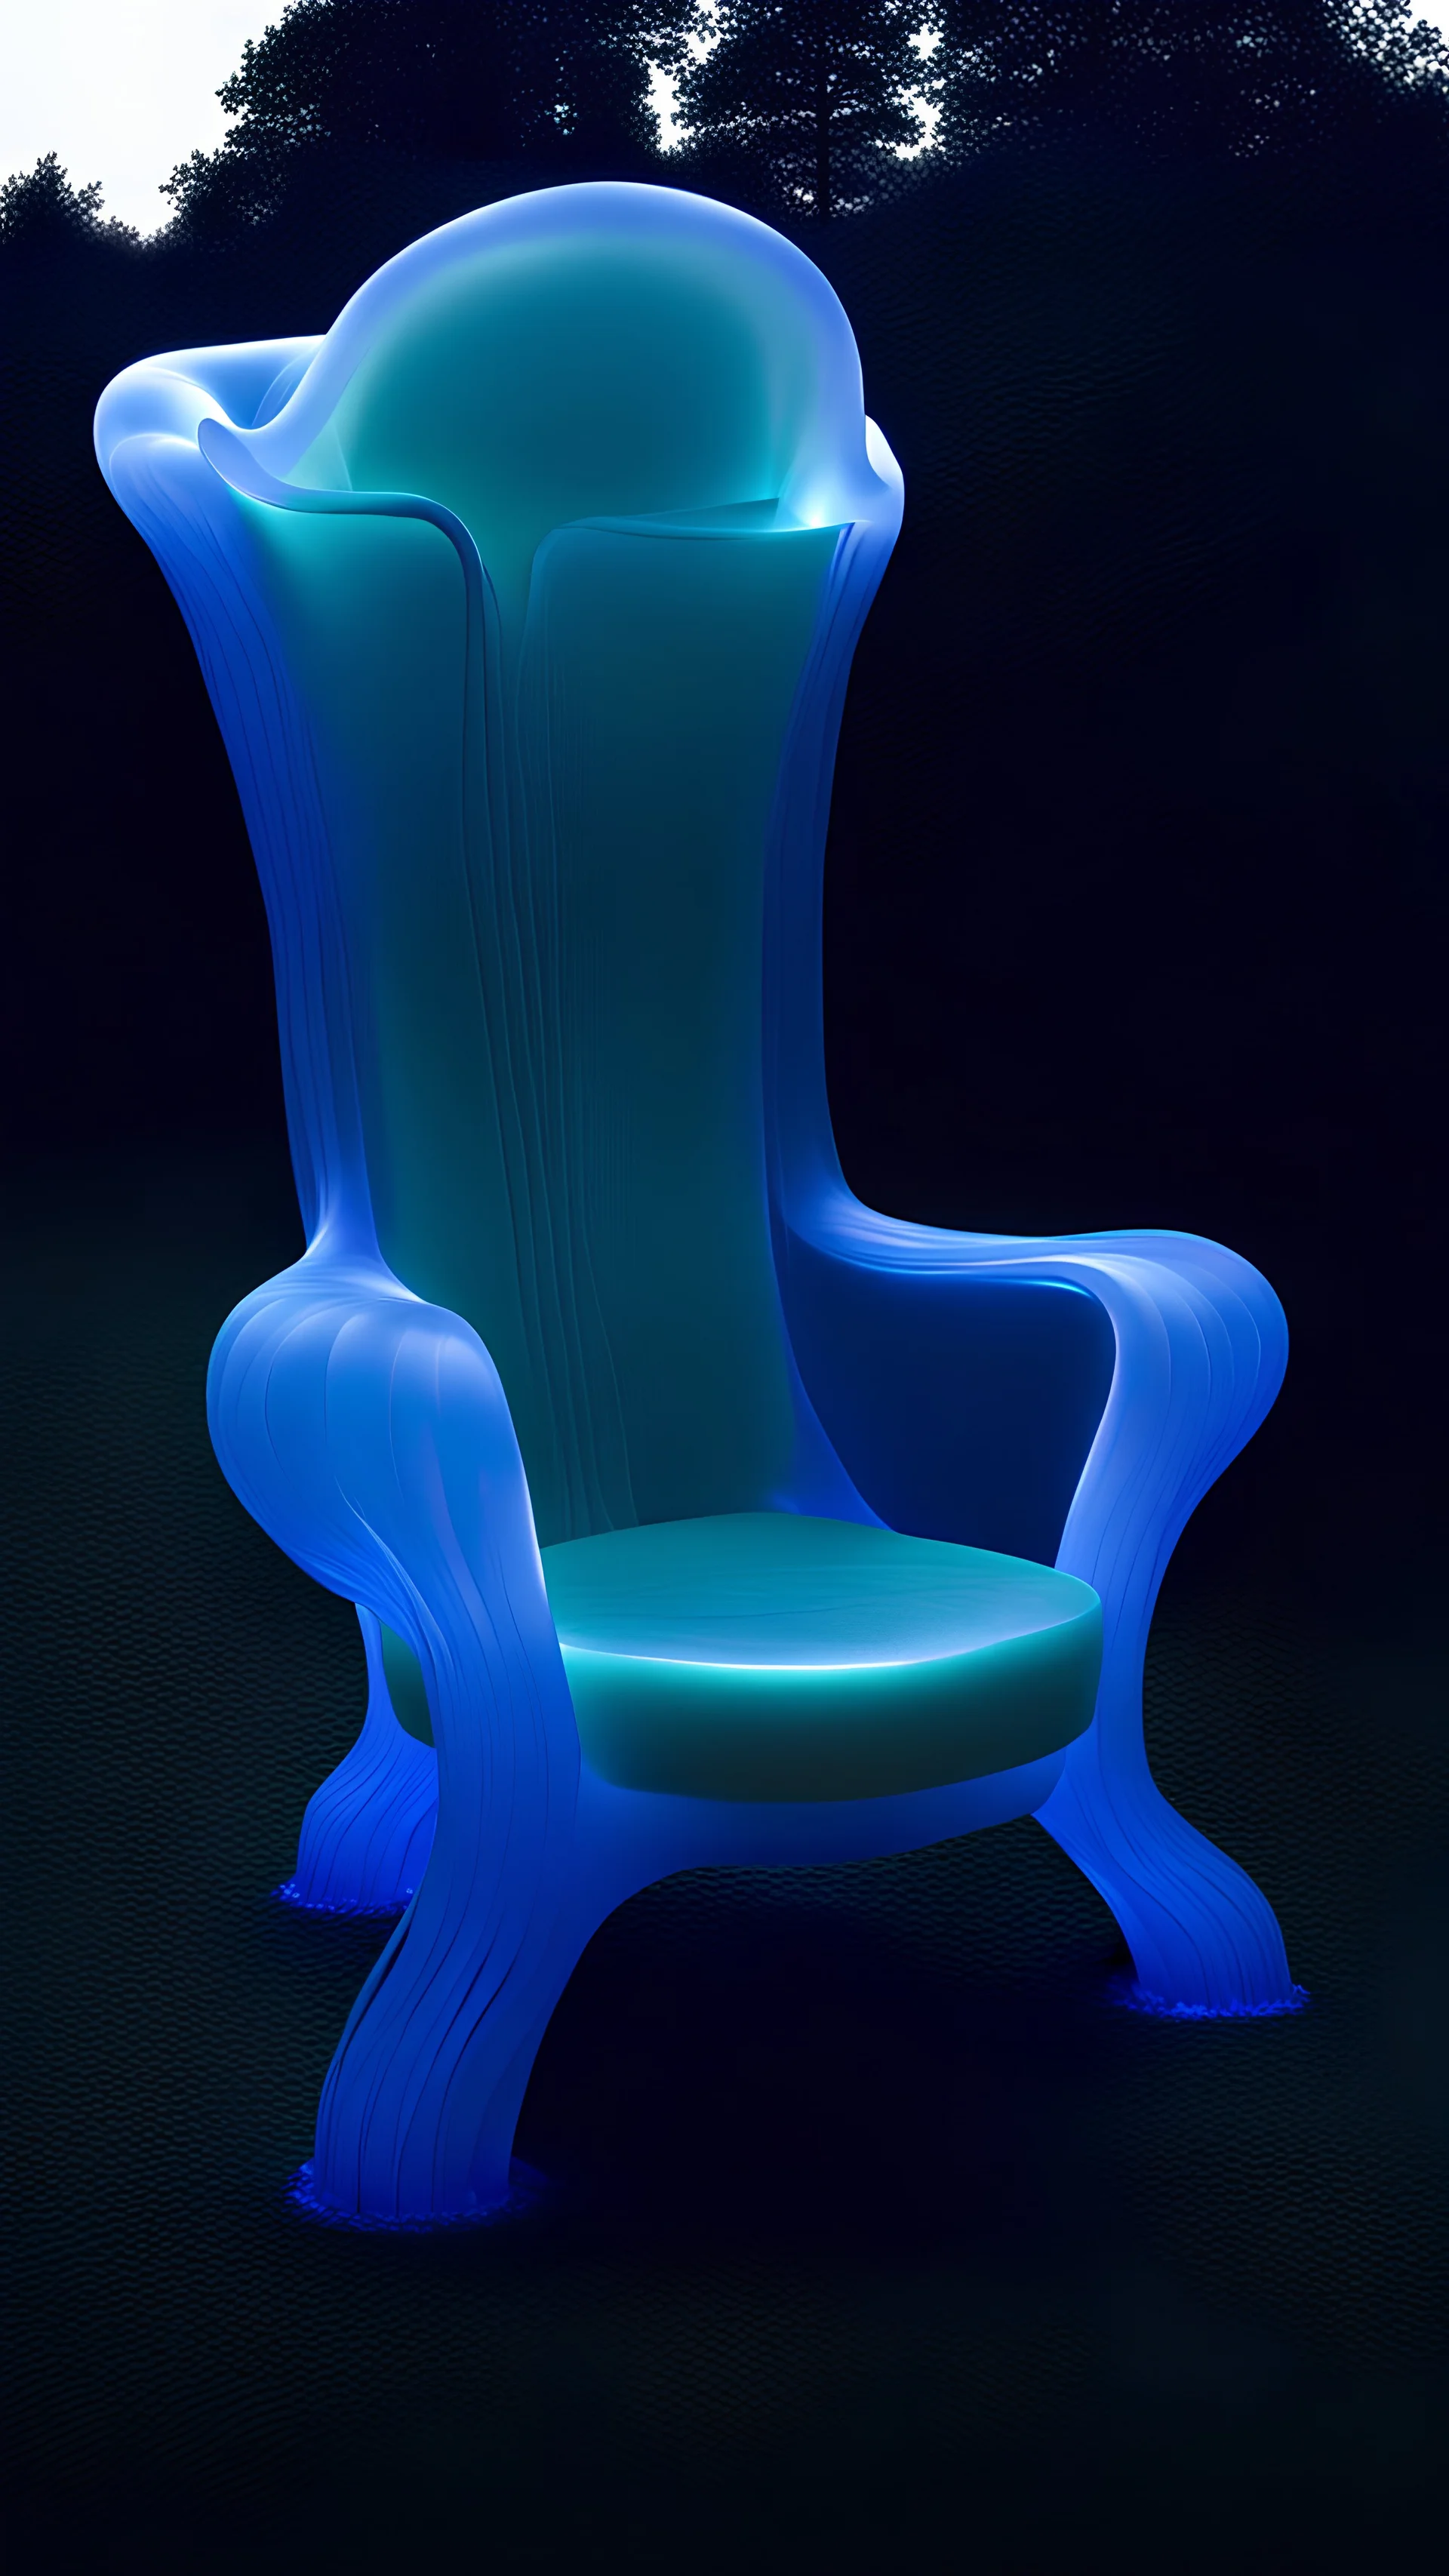 Imagine a sculpture of an armchair made entirely of translucent, glowing jellyfish